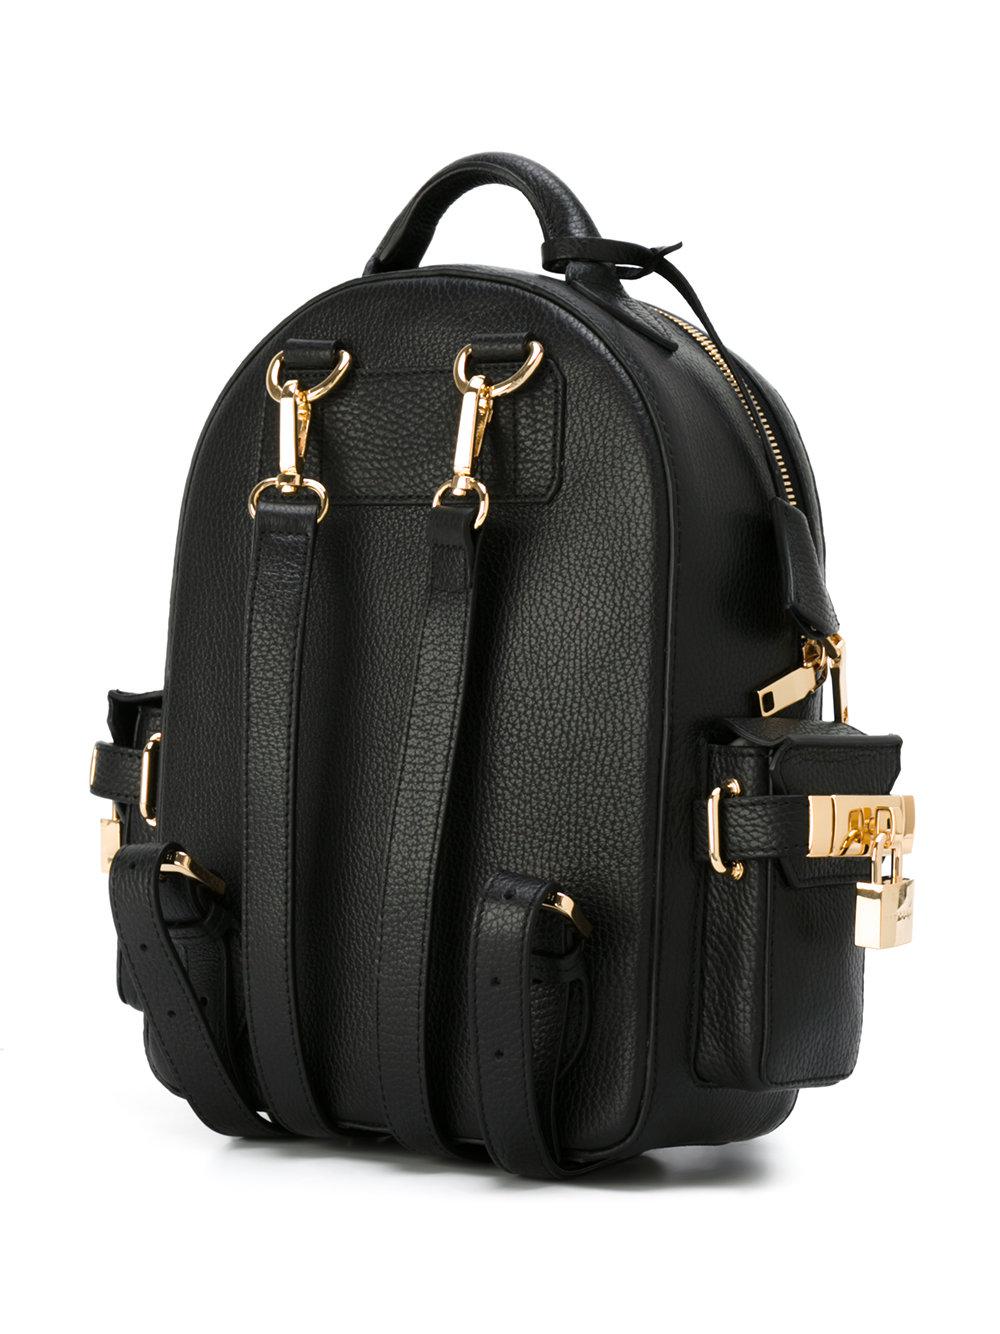 Buscemi Leather Mini Backpack in Black for Men - Lyst